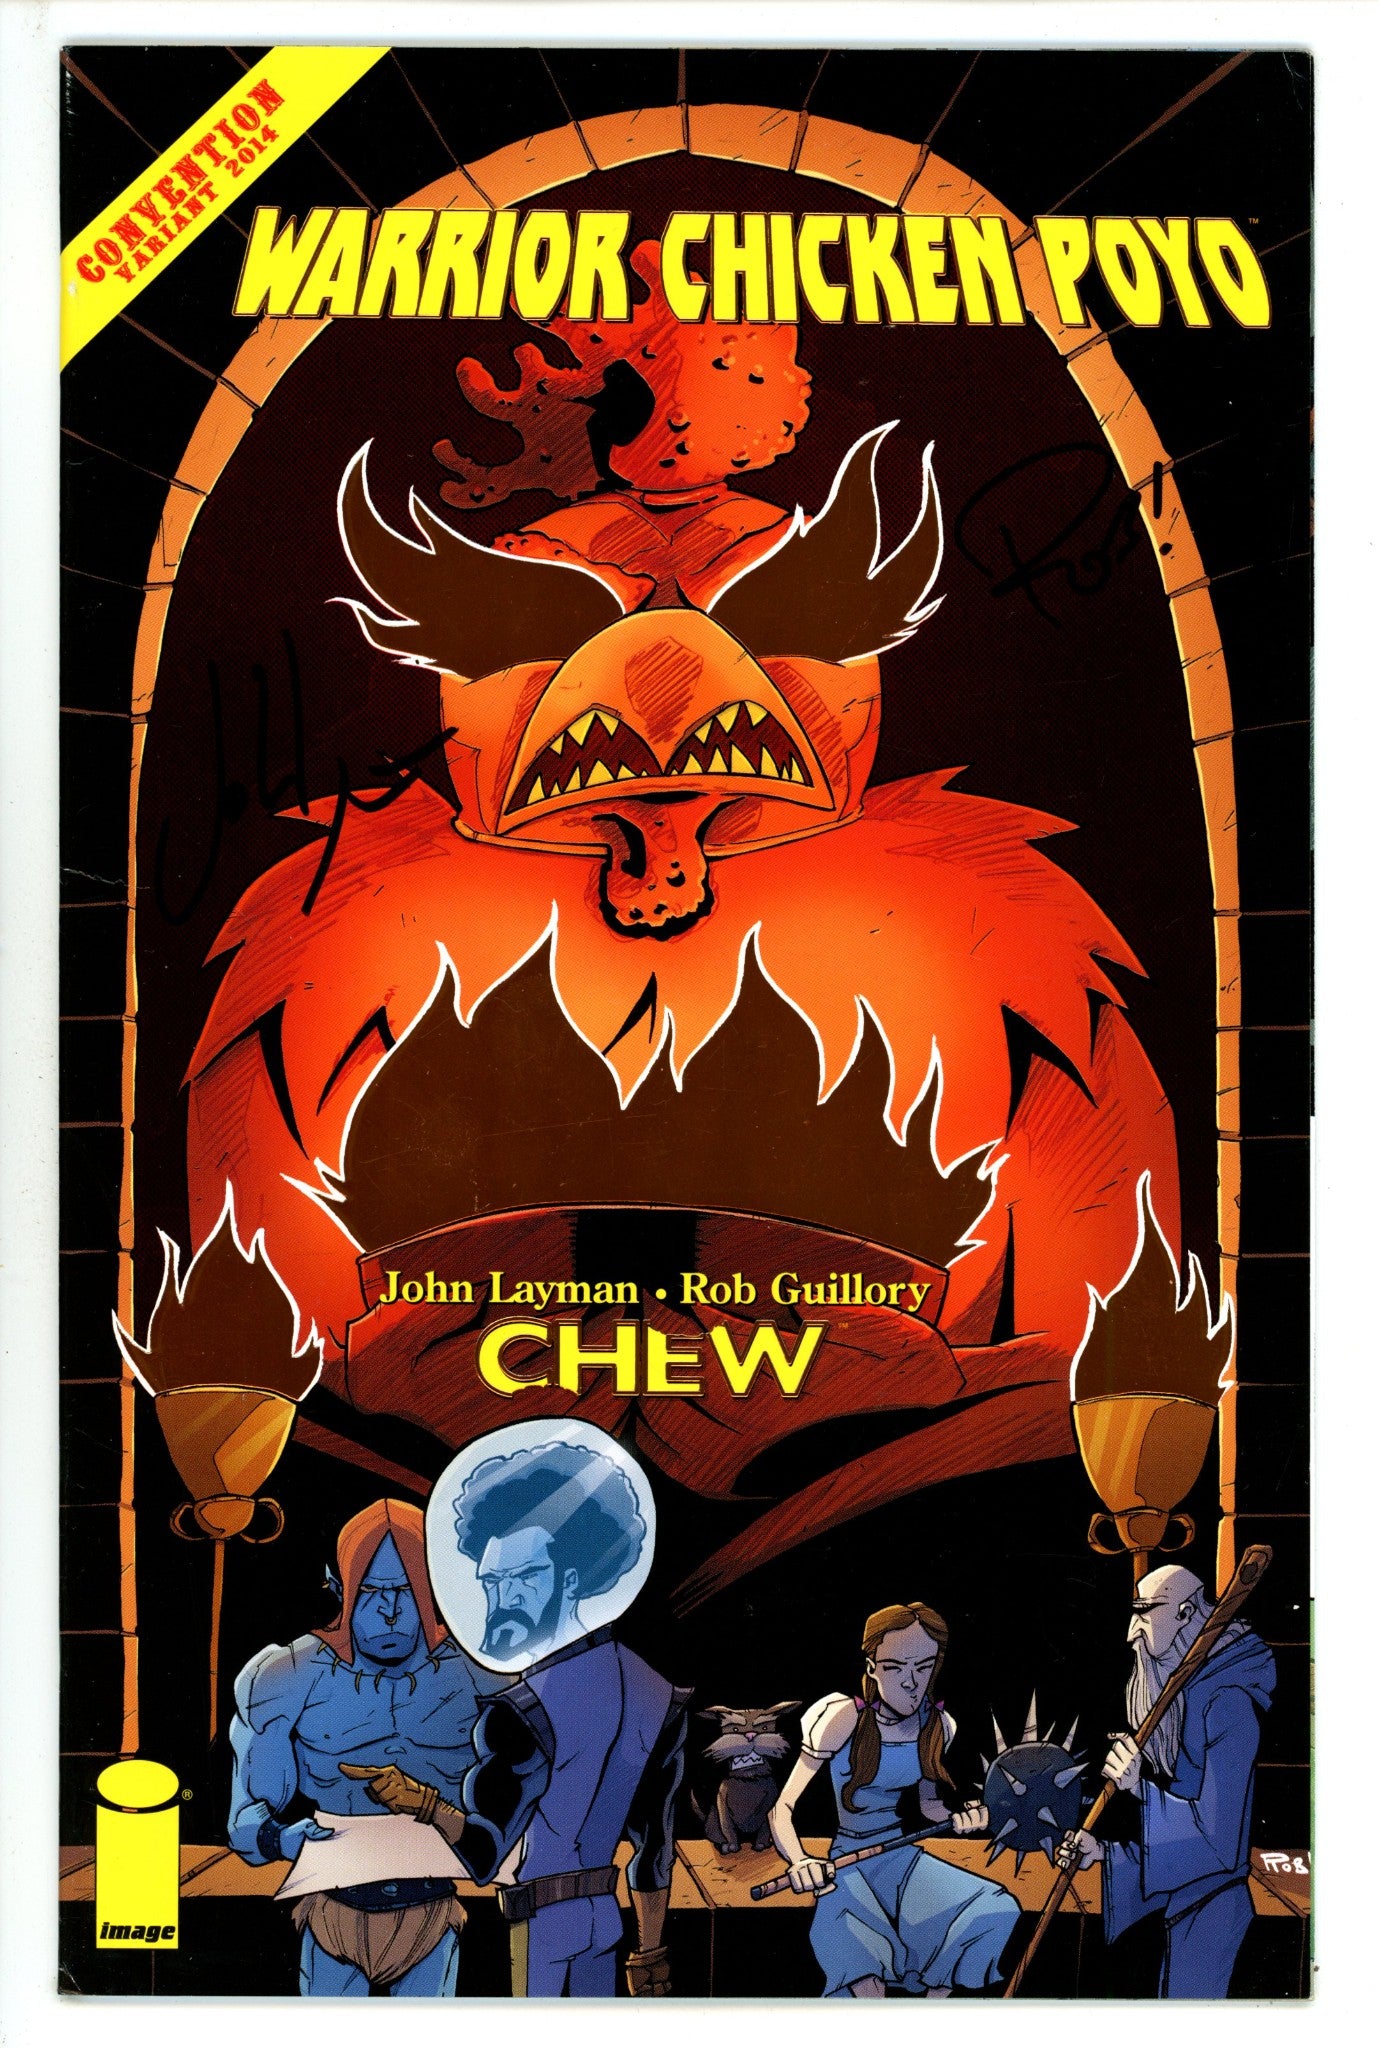 Chew: Warrior Chicken Poyo 1 FN (6.0) (2014) Guillory Gold Foil Convention Variant Signed x2 Cover John Layman & Rob Guillory 